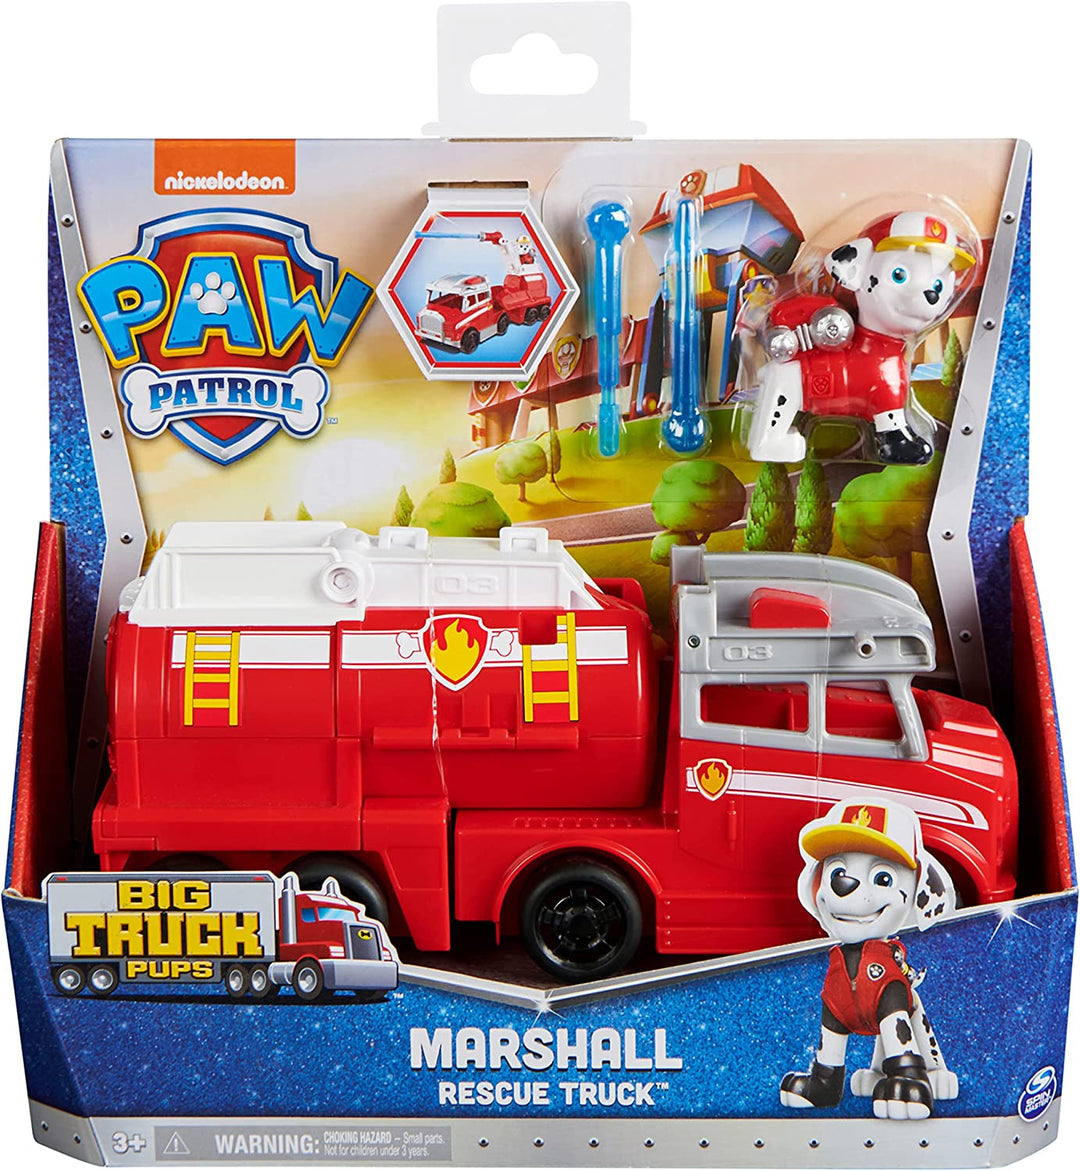 PAW Patrol, Big Truck Pups Marshall Transforming Toy Truck with Collectible Action Figure